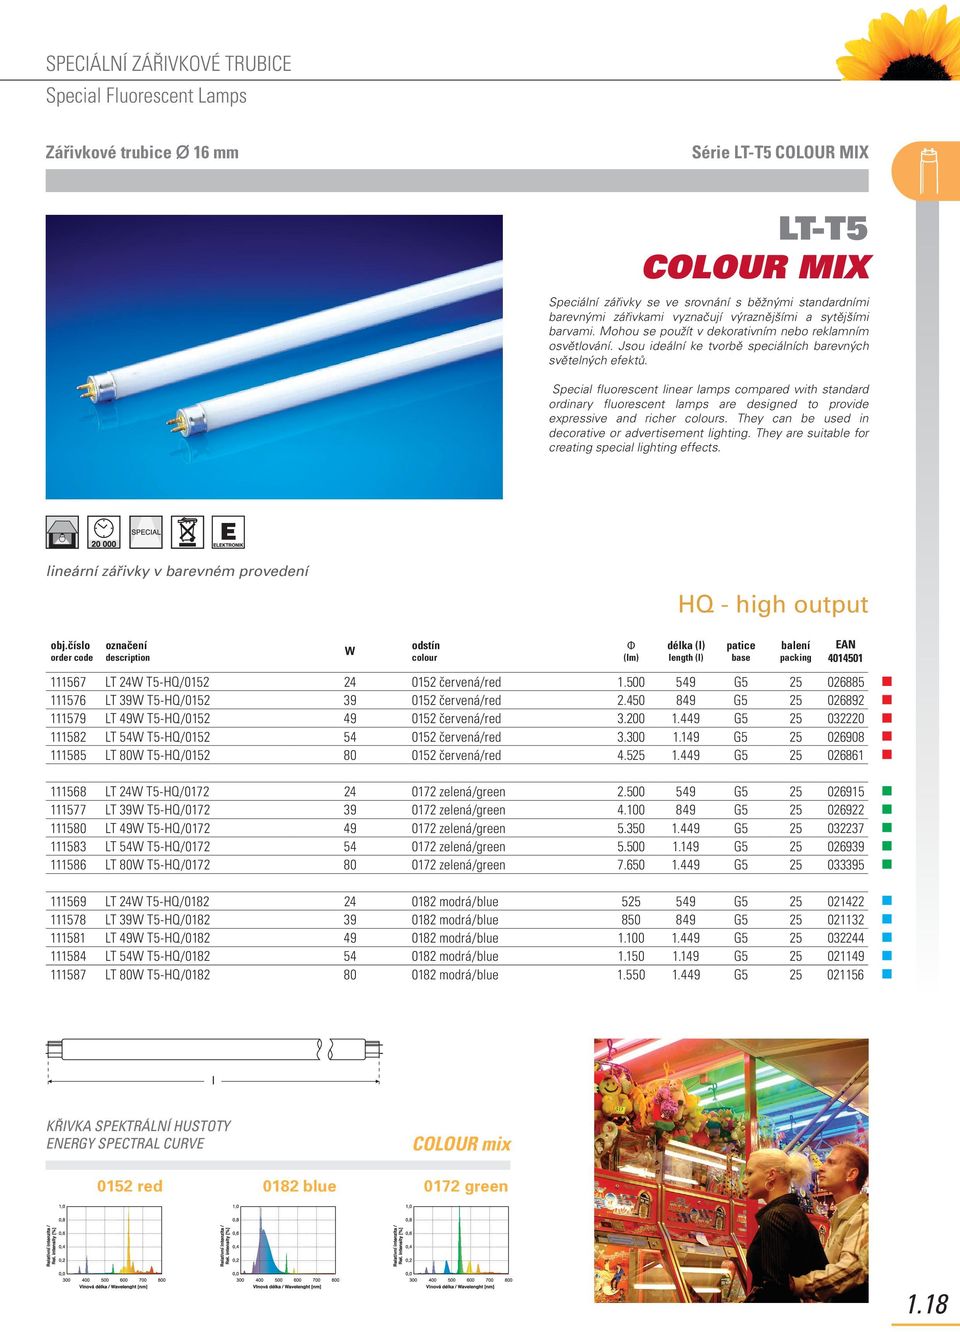 Special fluorescent linear lamps compared with standard ordinary fluorescent lamps are designed to provide expressive and richer s. They can be used in decorative or advertisement lighting.